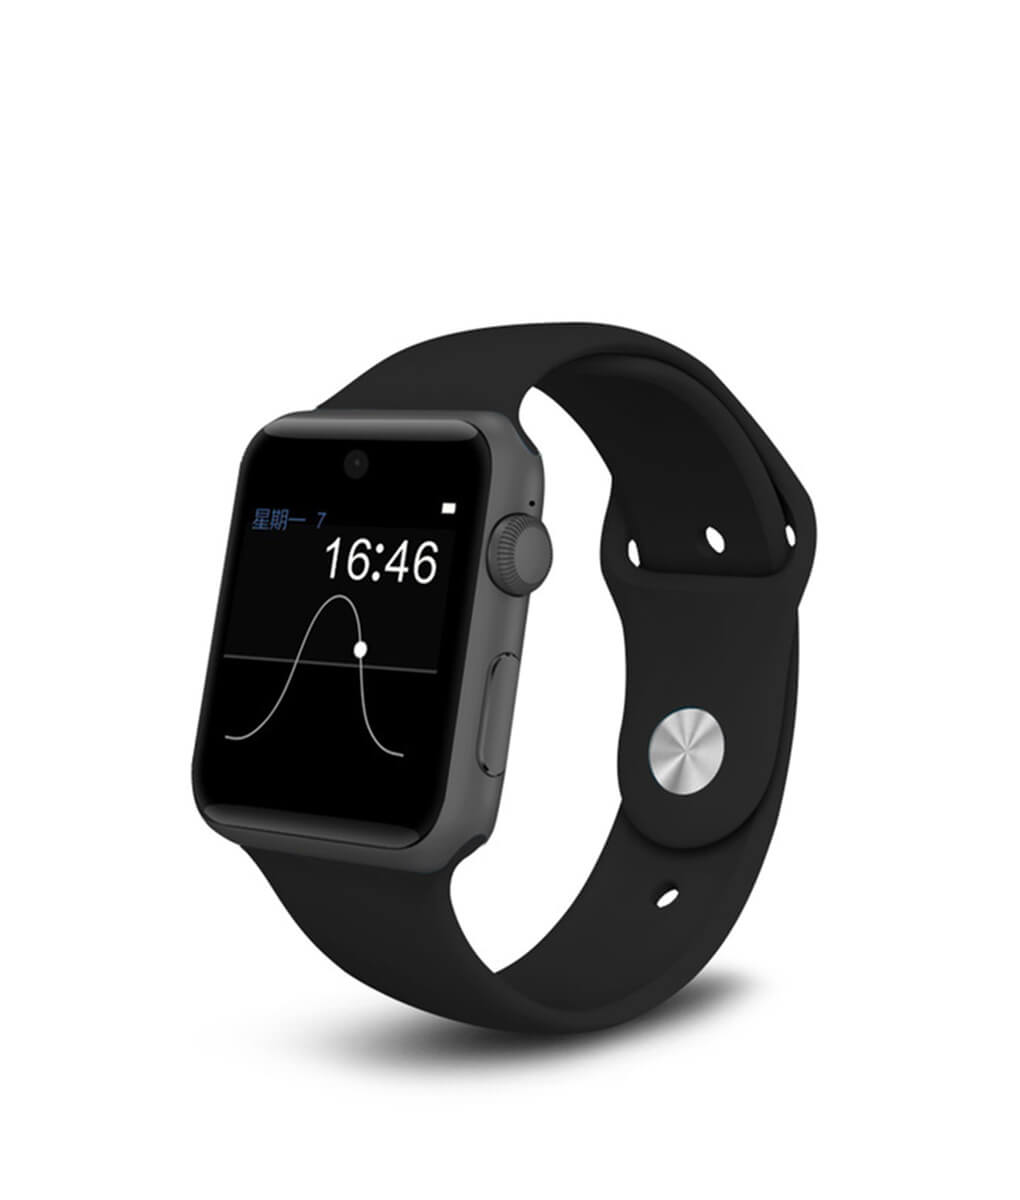 smartwatch for ios